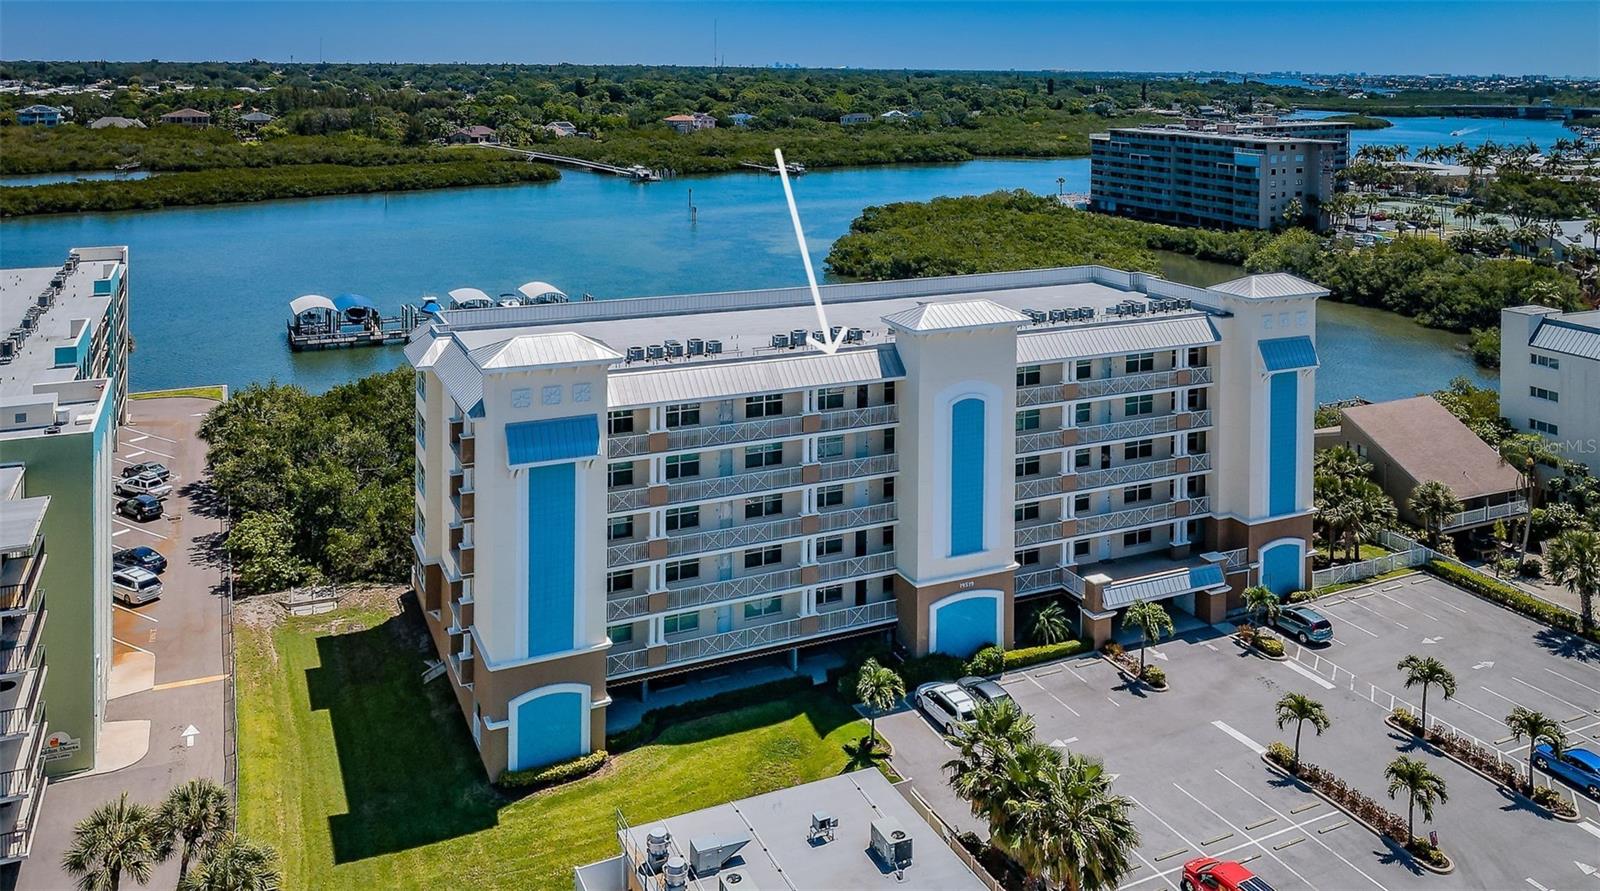 Like New Dolphin Key Condos in Indian Shores!